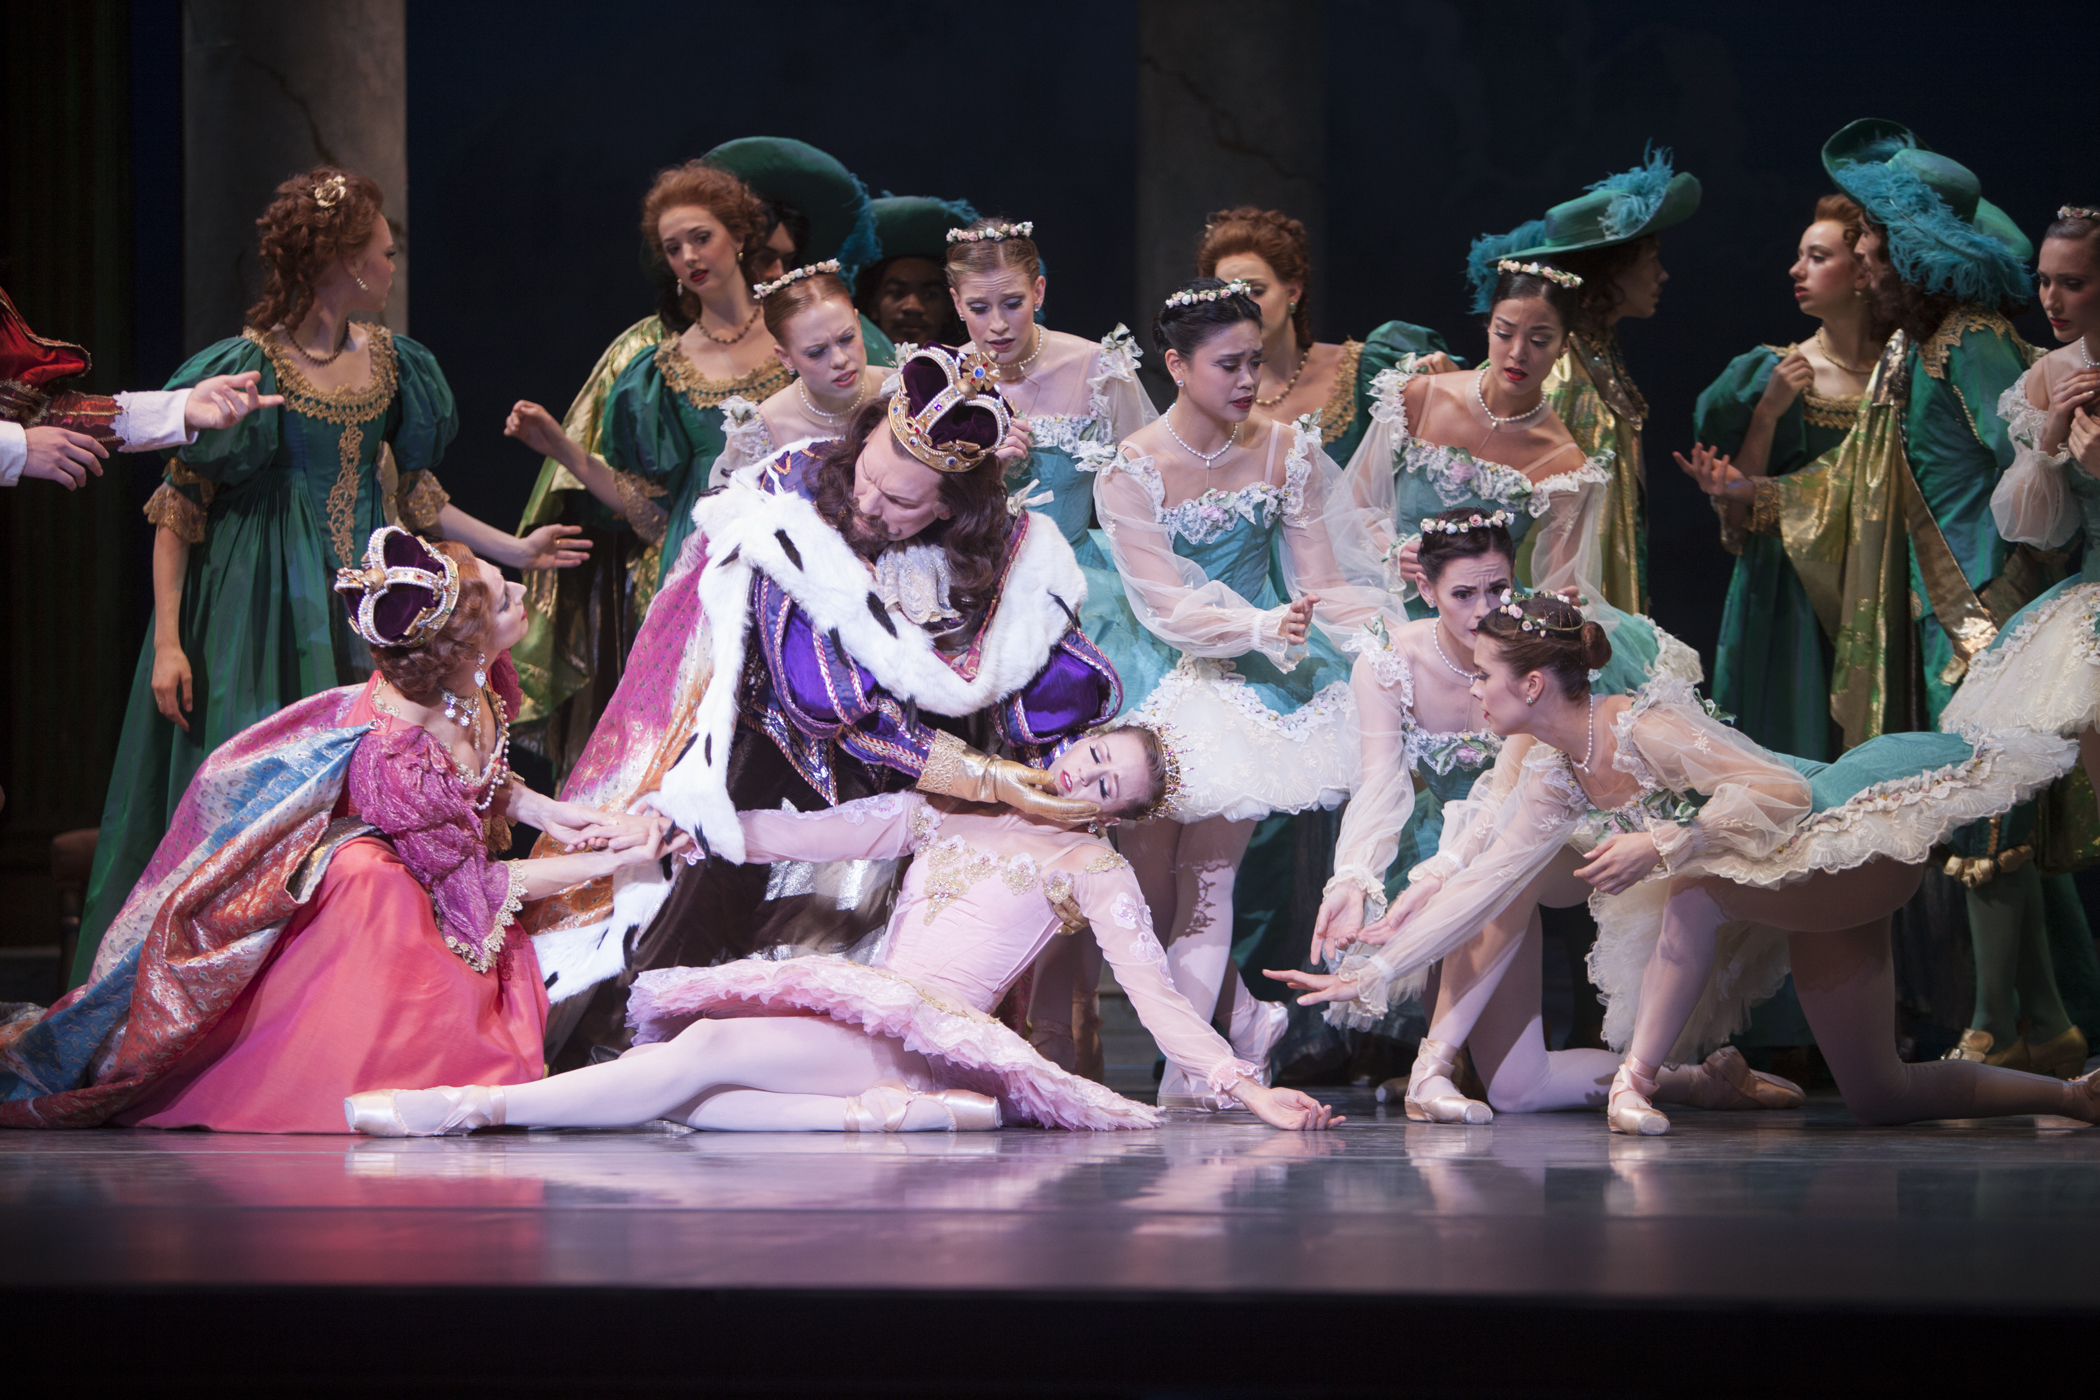 A dramatic moment in The Sleeping Beauty. Beautiful Aurora is in a deep sleep and the king, queen and others surround her with dramatic concern.